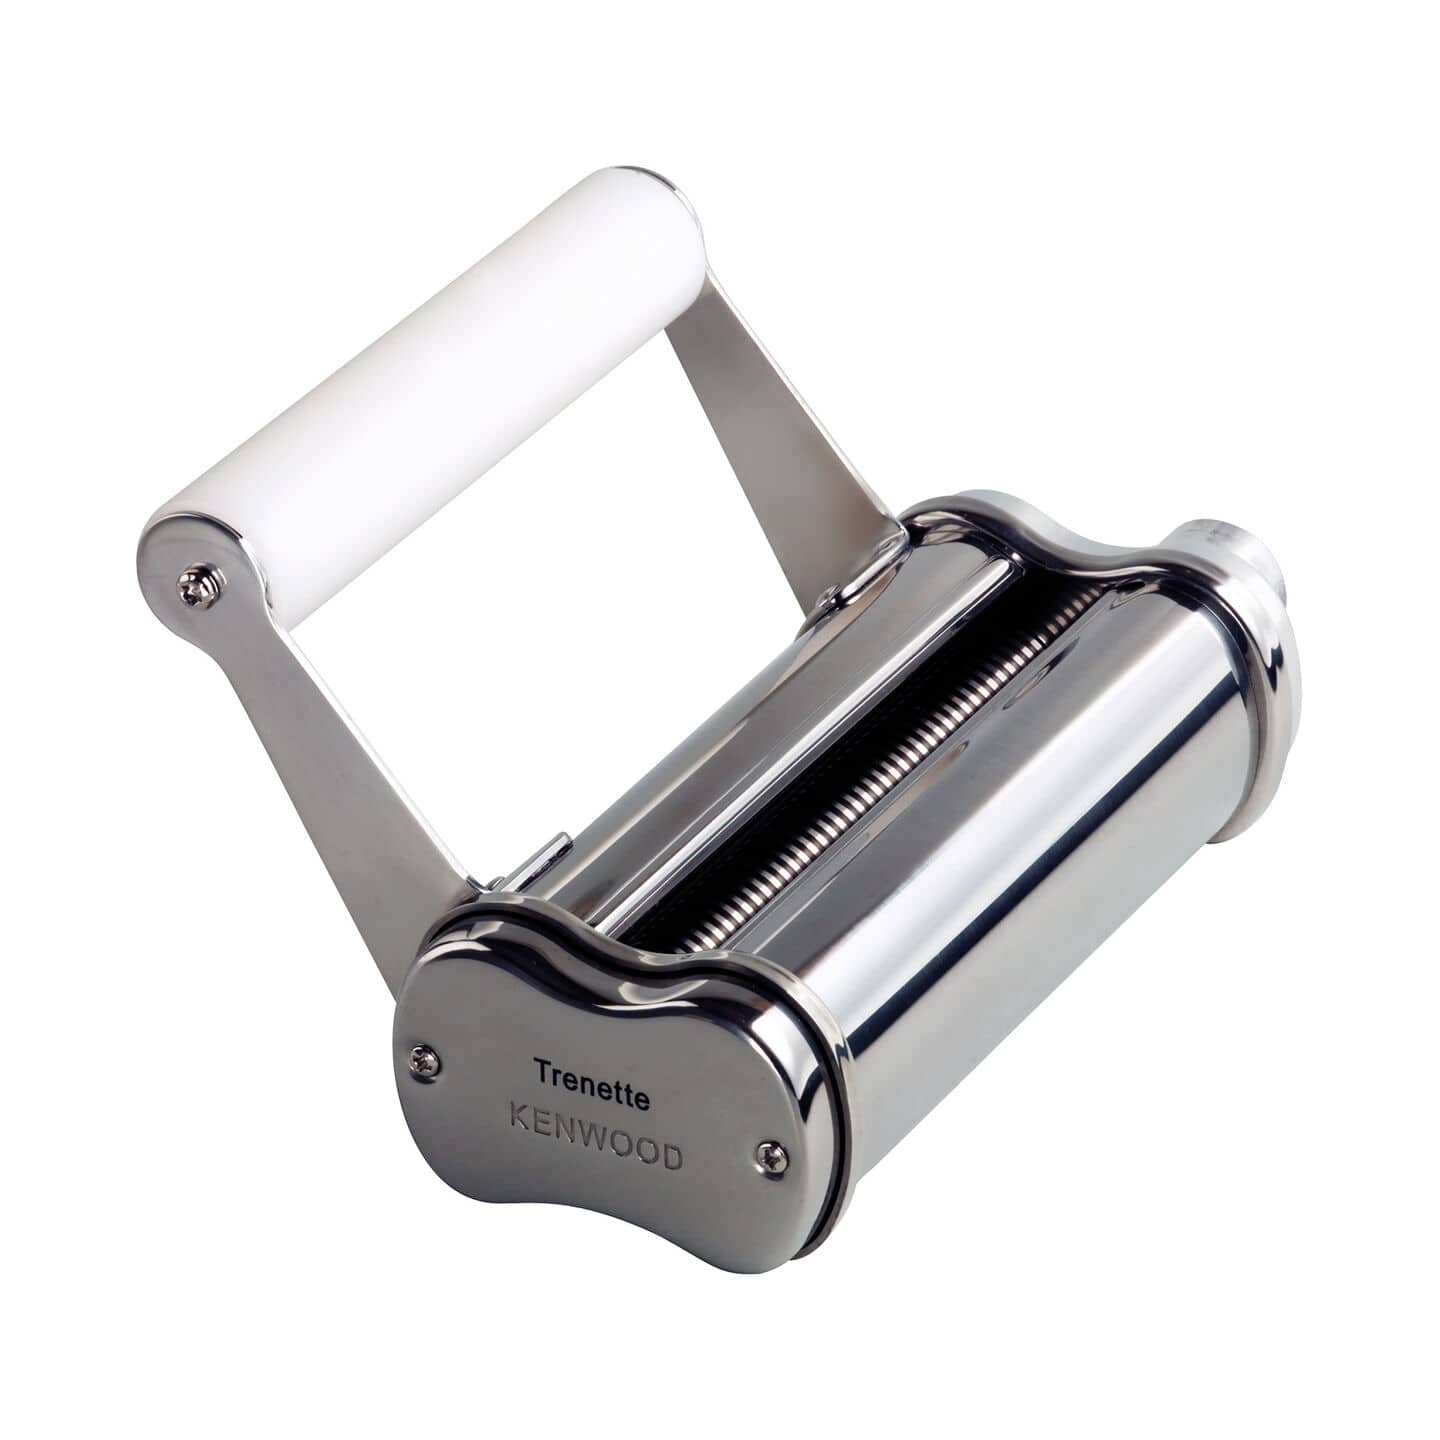 Kenwood Trenette Metal Pasta Cutter AT973A Silver Polished